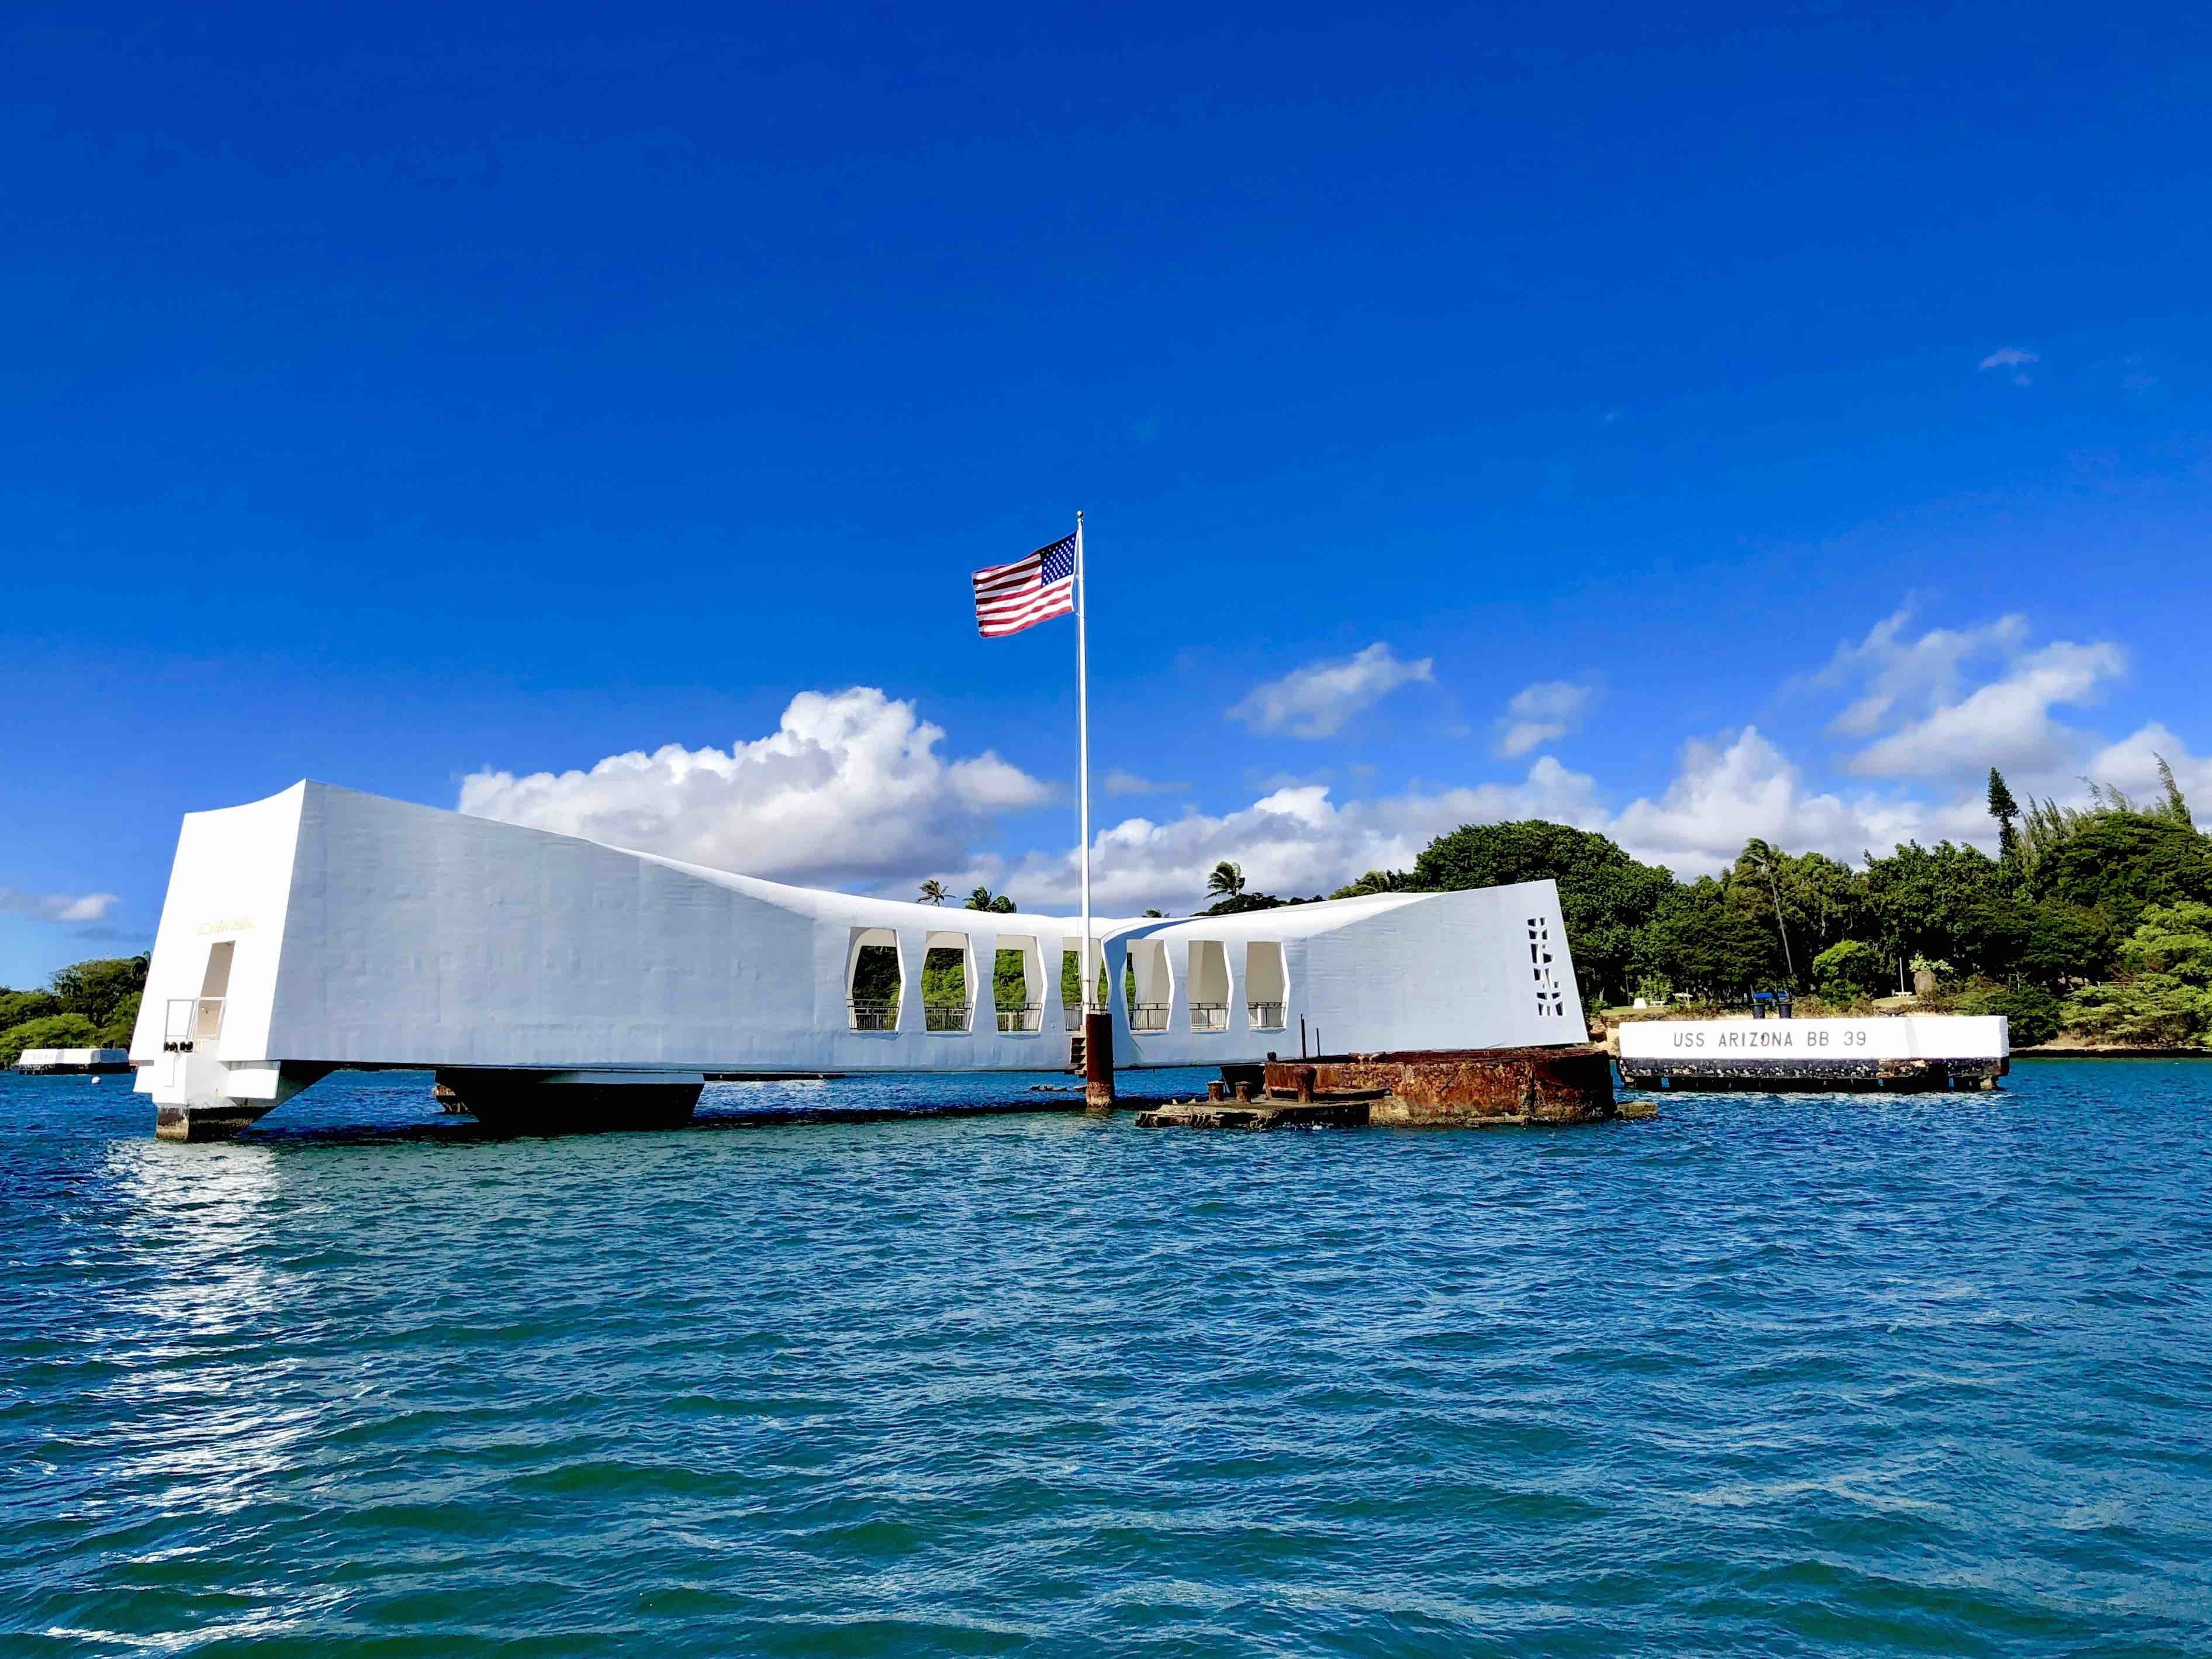 Visiting the USS Arizona memorial. While it is closed to board due to structural issues, they do an excellent job of ensuring the visit is still a very memorable one. No cost to head out to the memorial!